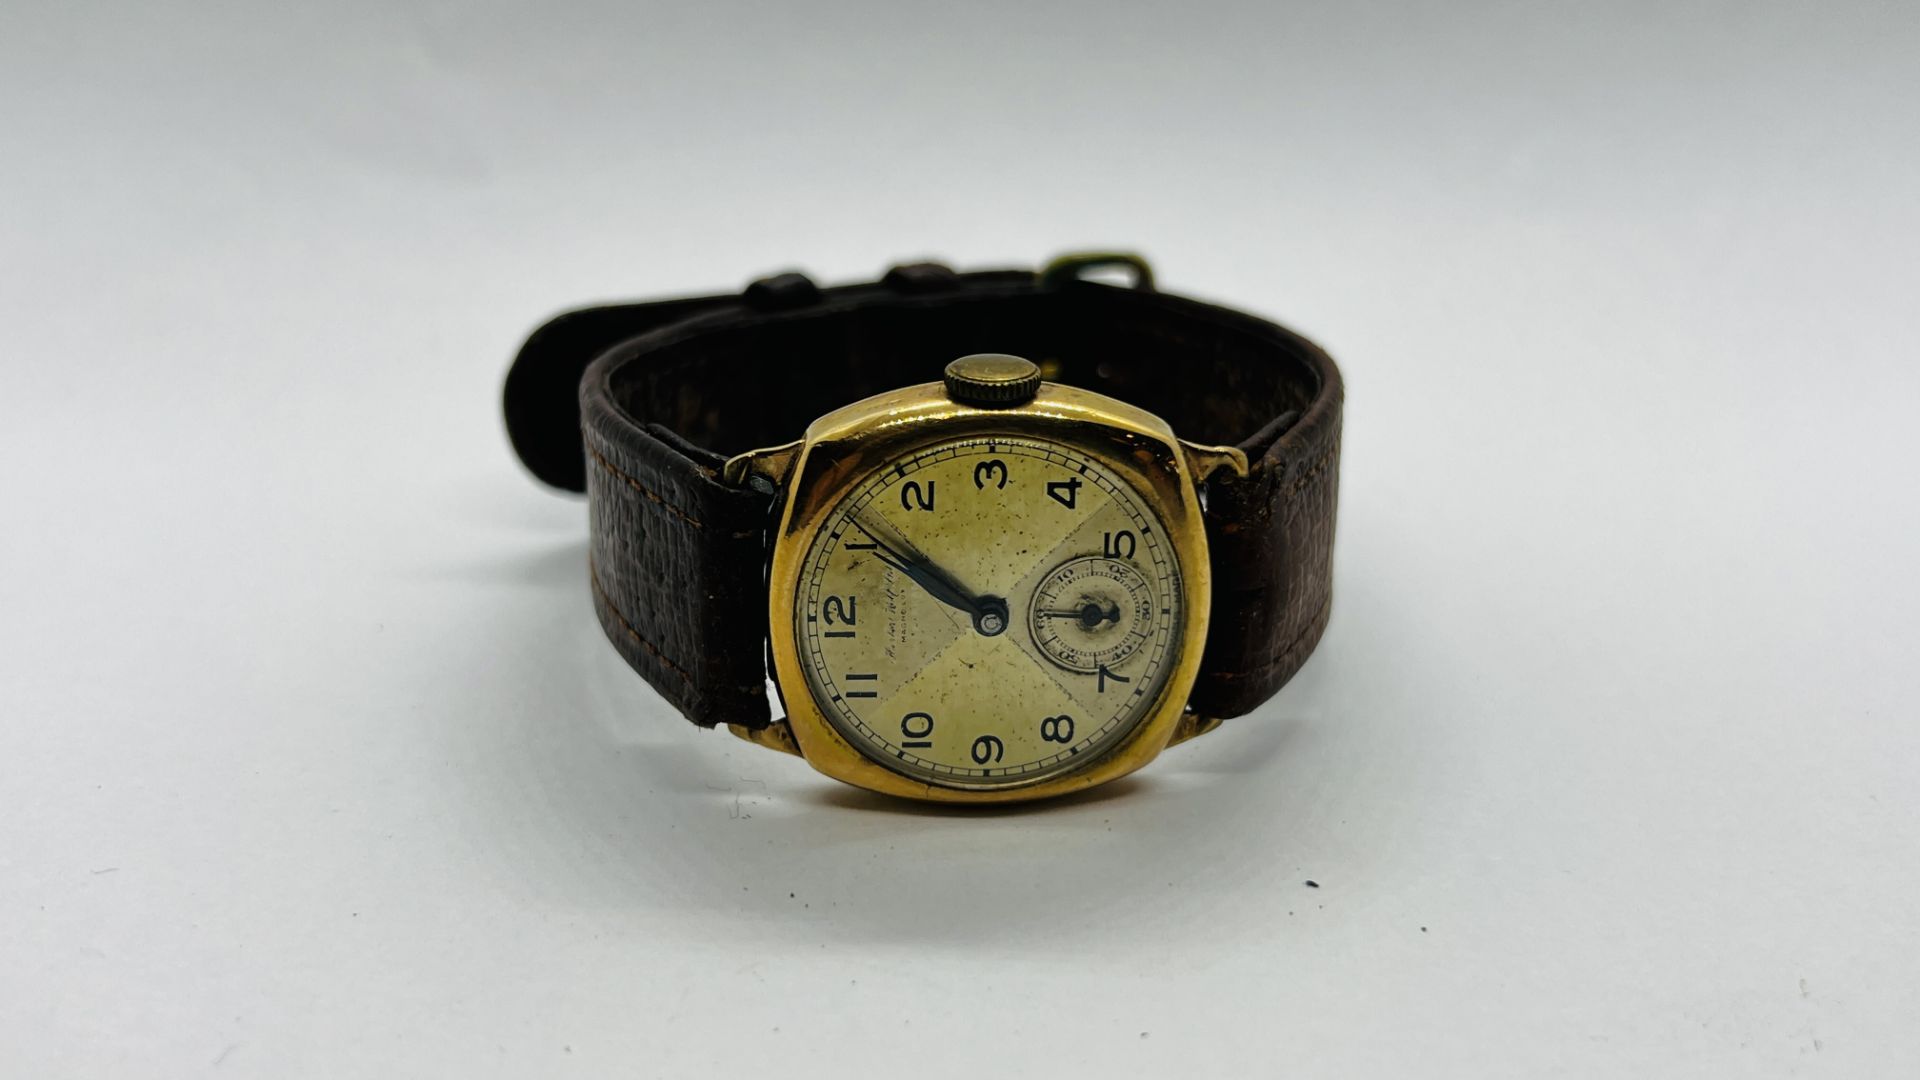 A VINTAGE 9CT GOLD CASED WRIST WATCH MARKED HERBERT ....... LTD MAGNO LUX ON A BROWN LEATHER STRAP. - Image 2 of 7